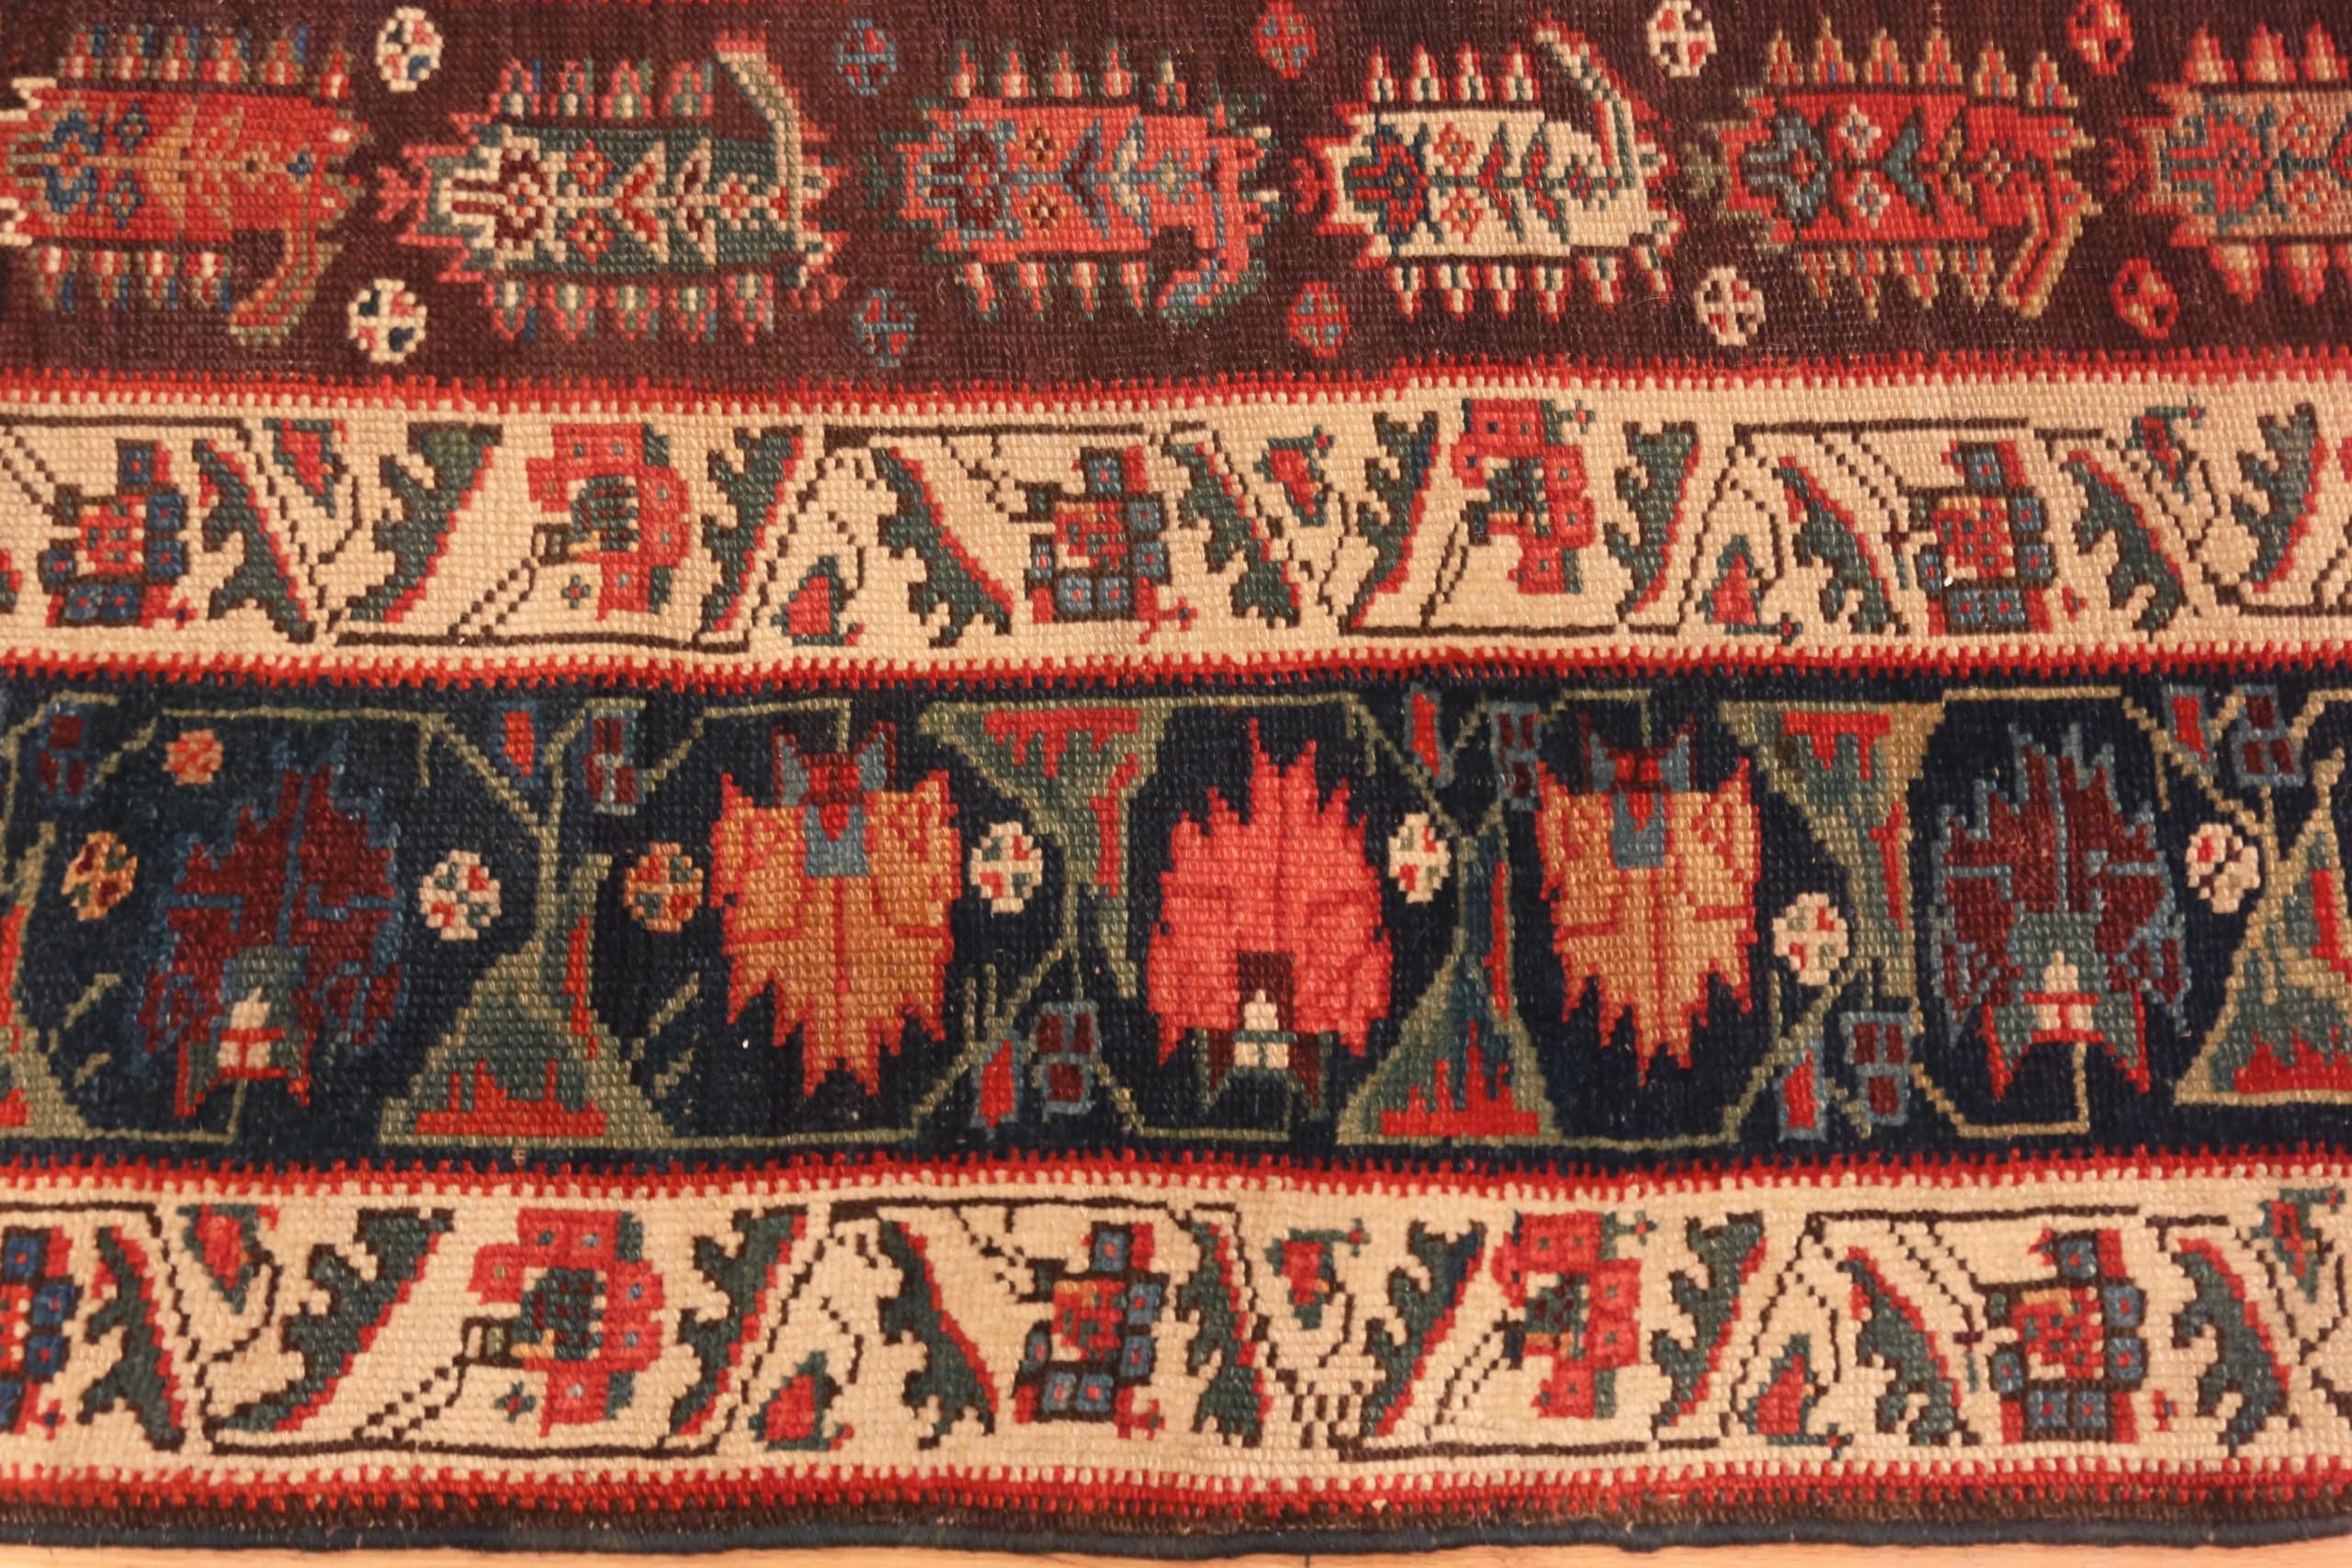 Beautiful Tribal Antique North West Persian Rug, Country of Origin / Rug type: Persian rugs, Circa date: 1900. Size: 6 ft 5 in x 11 ft 8 in (1.96 m x 3.56 m)